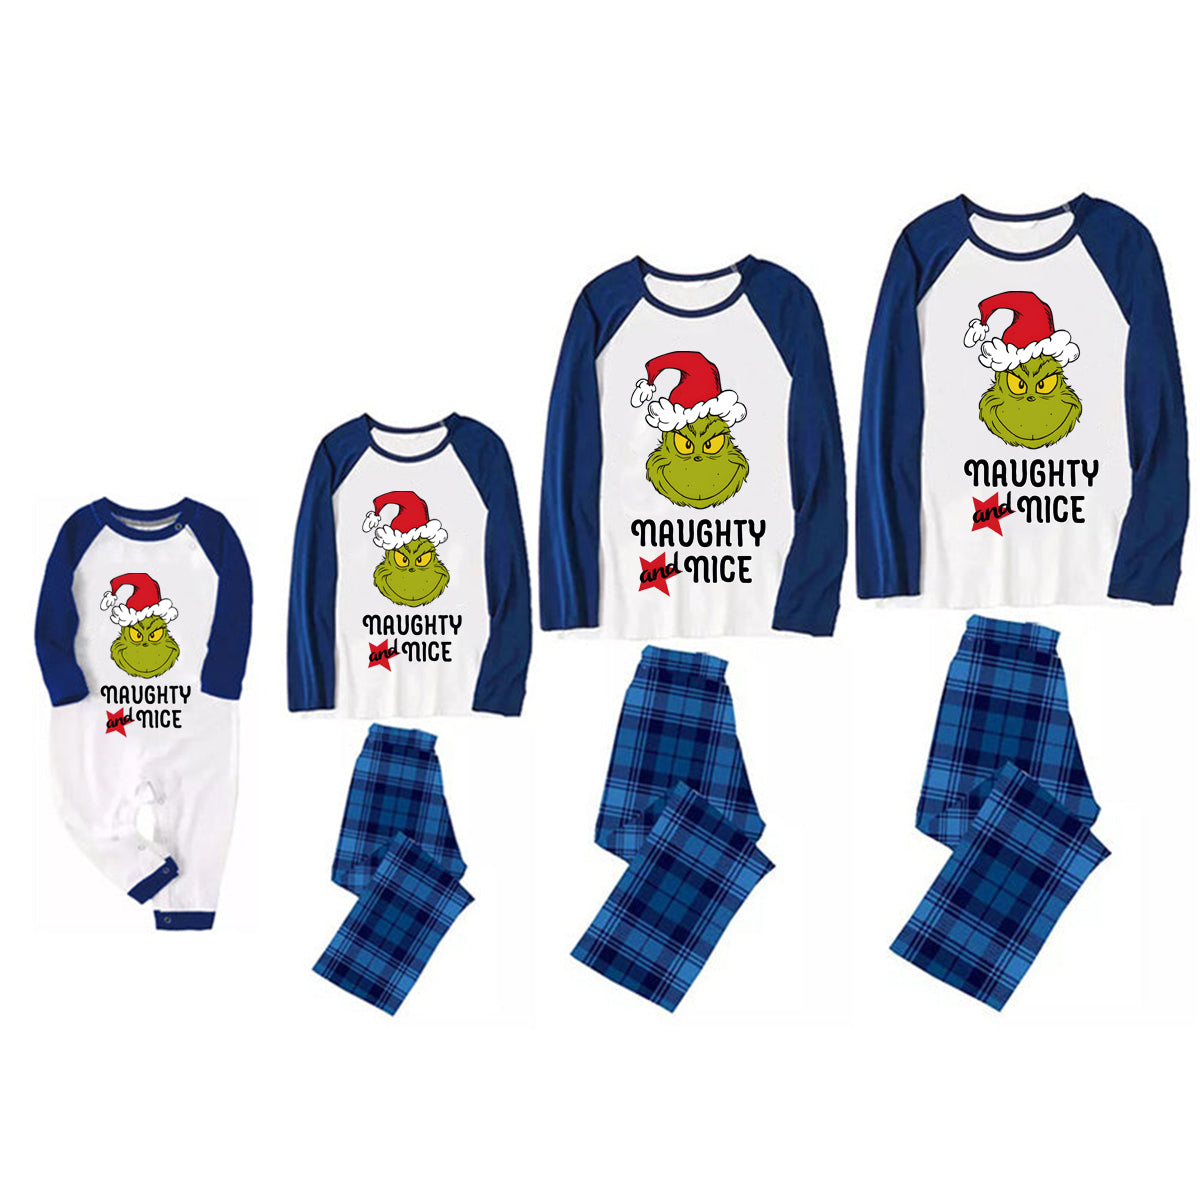 Christmas "Naughty&Nice" Letter Print Patterned Casual Long Sleeve Sweatshirts Blue Sleeve Contrast Tops and Blue Plaid Pants Family Matching Pajamas Sets With Pet Bandan